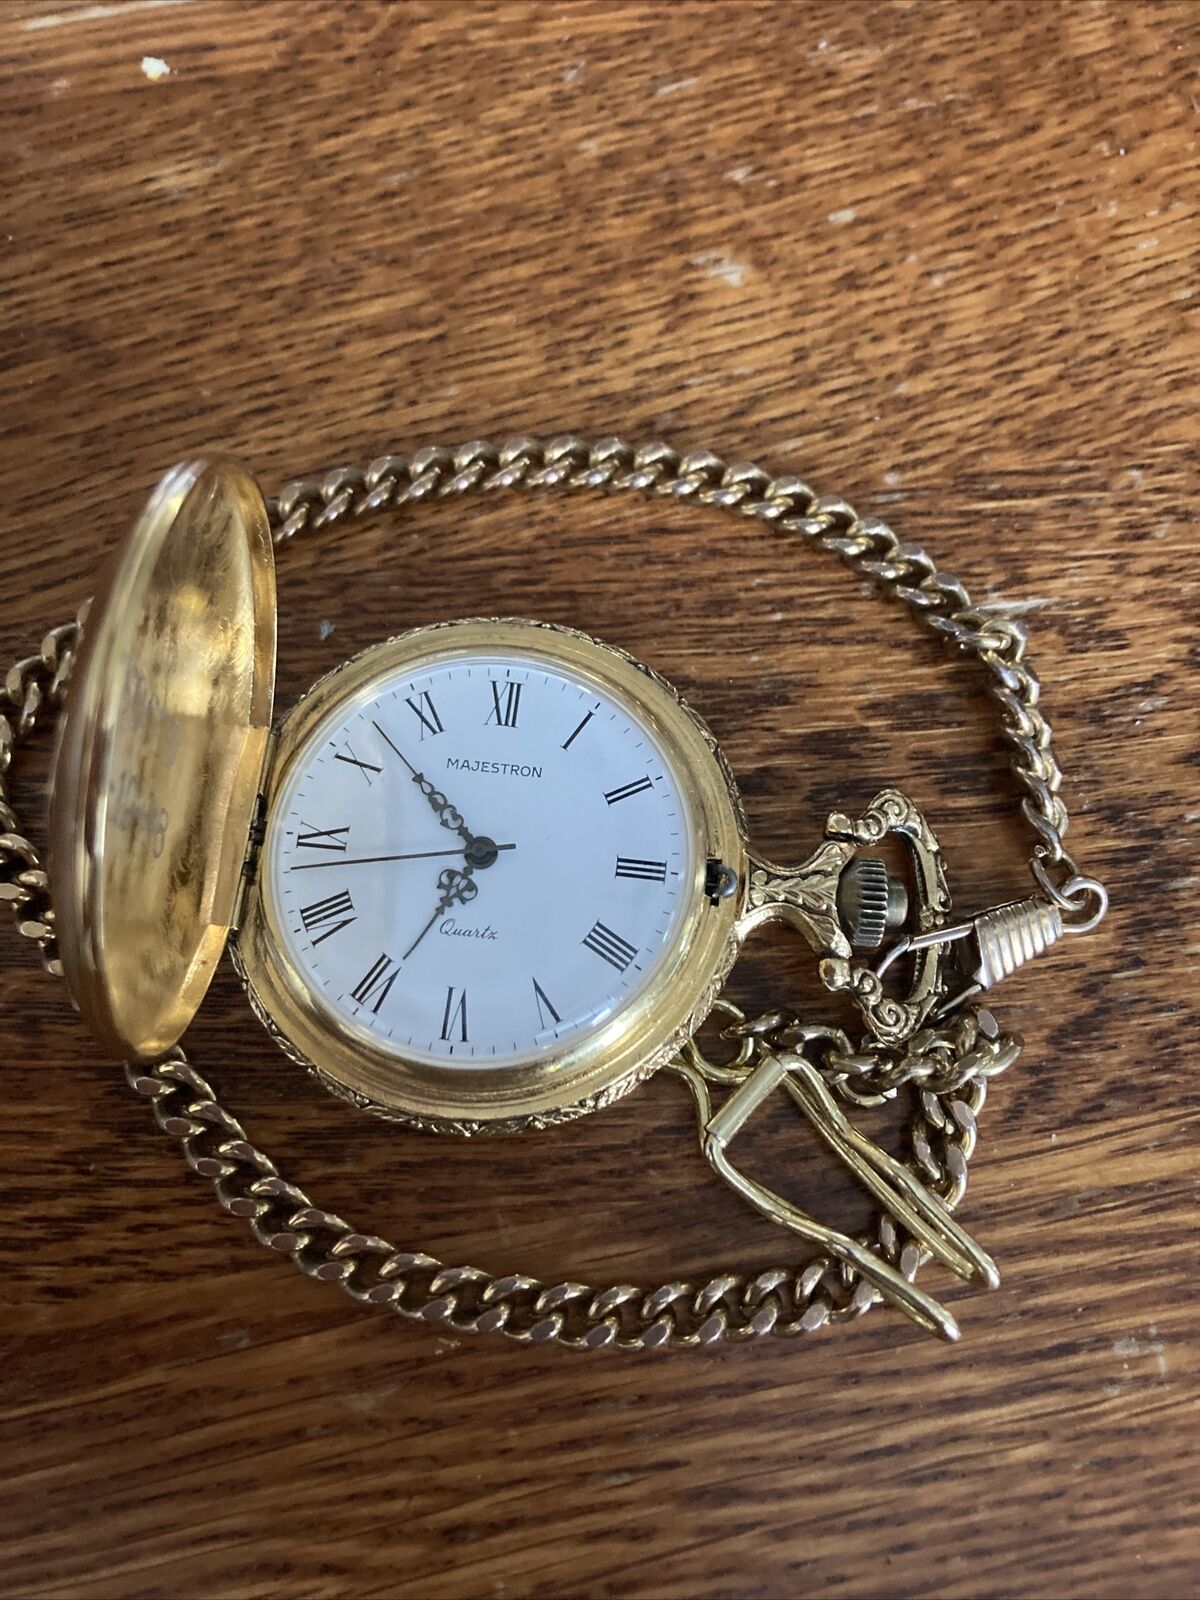 Majestron Swiss Made  Quartz Pocket Watch, With Chain, Sold As Is With No Return